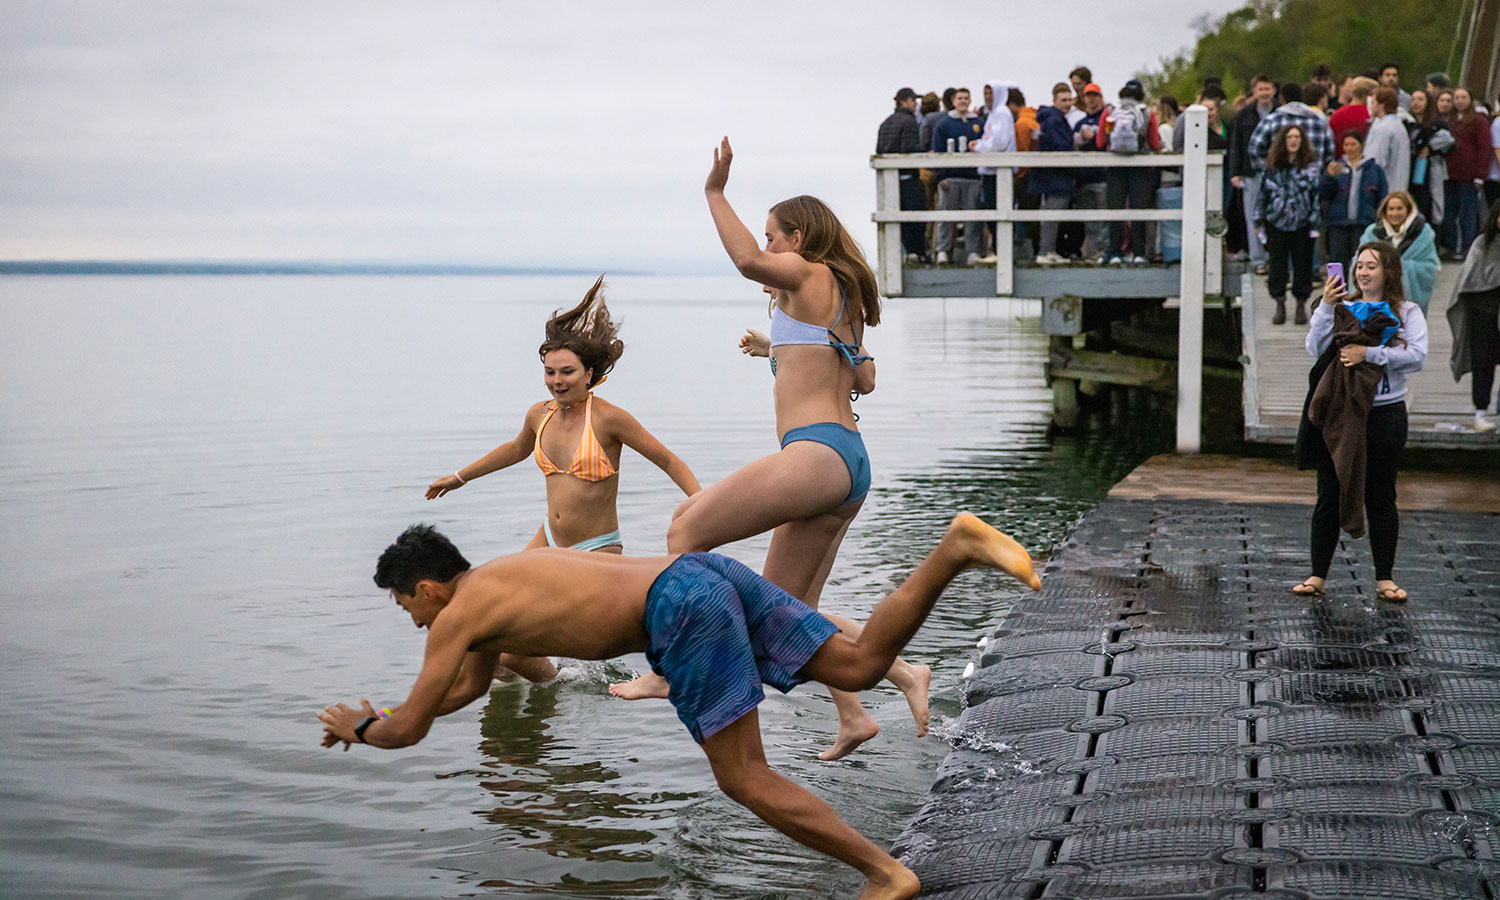 As is tradition on the day of Commencement, after watching the sunrise from Bozzuto Boathouse, HWS graduates jump into Seneca Lake.